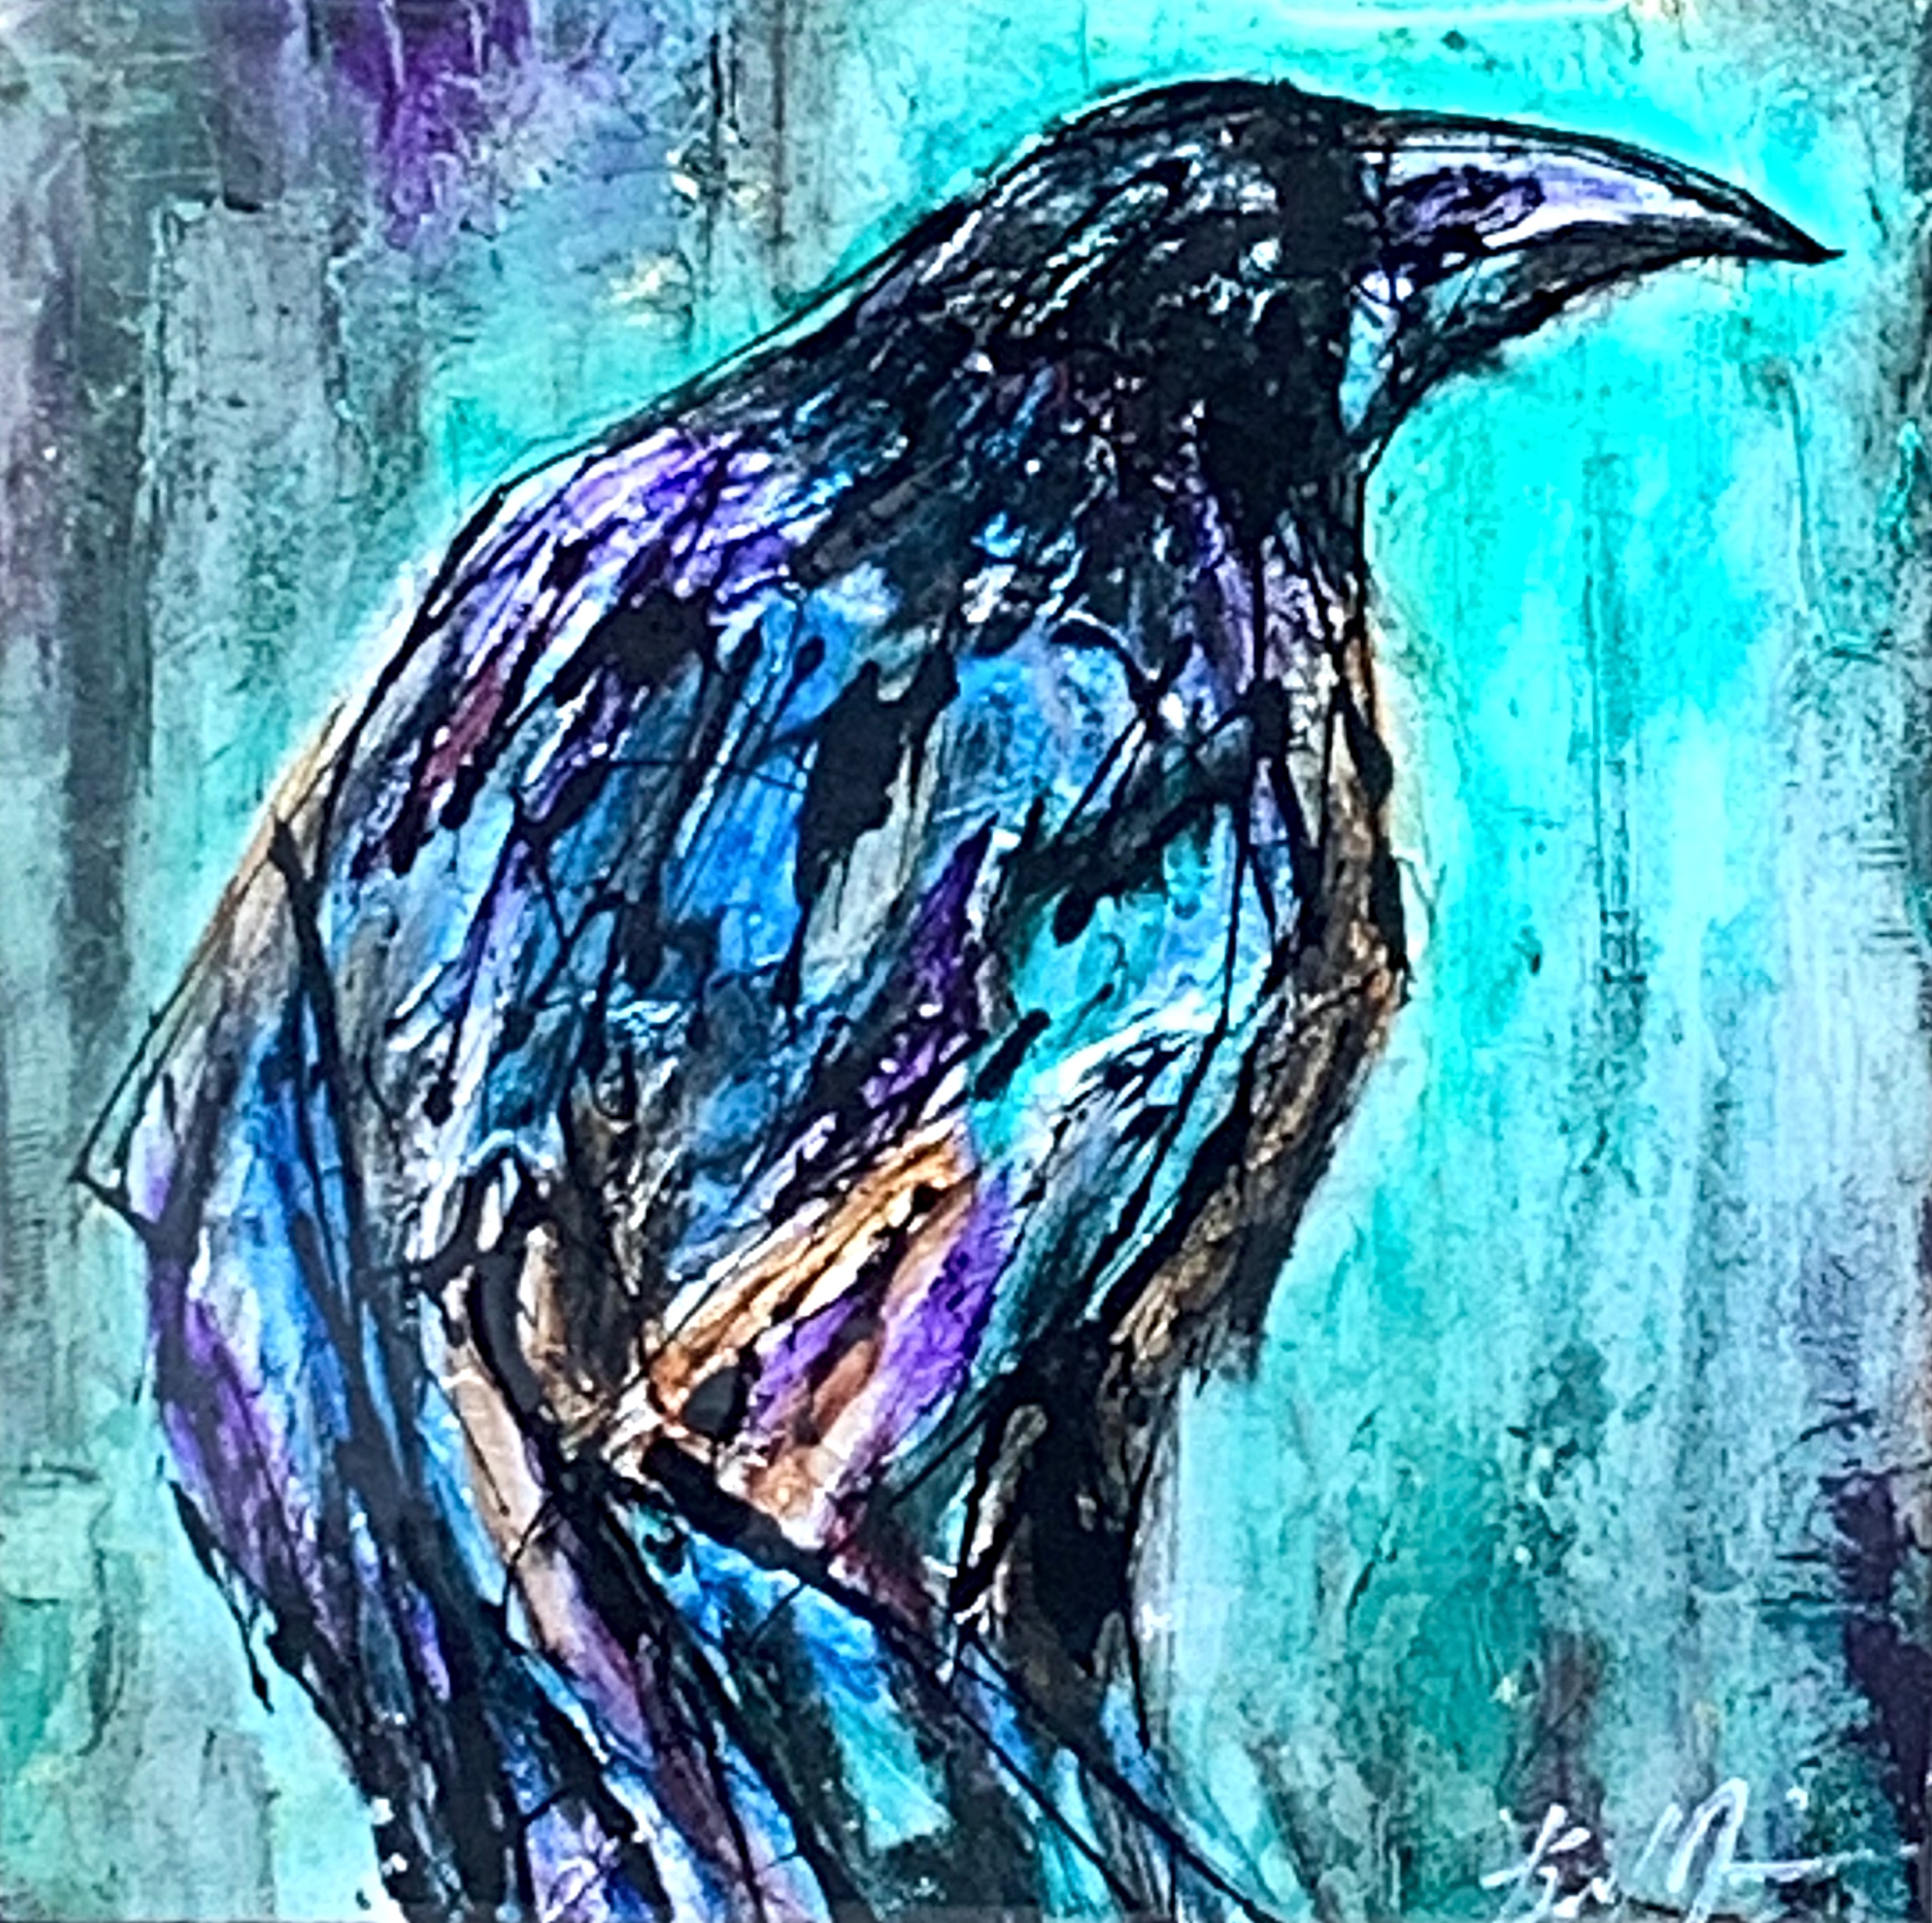 Playful crow portrait on a bright turquoise background by David Zimmerman.